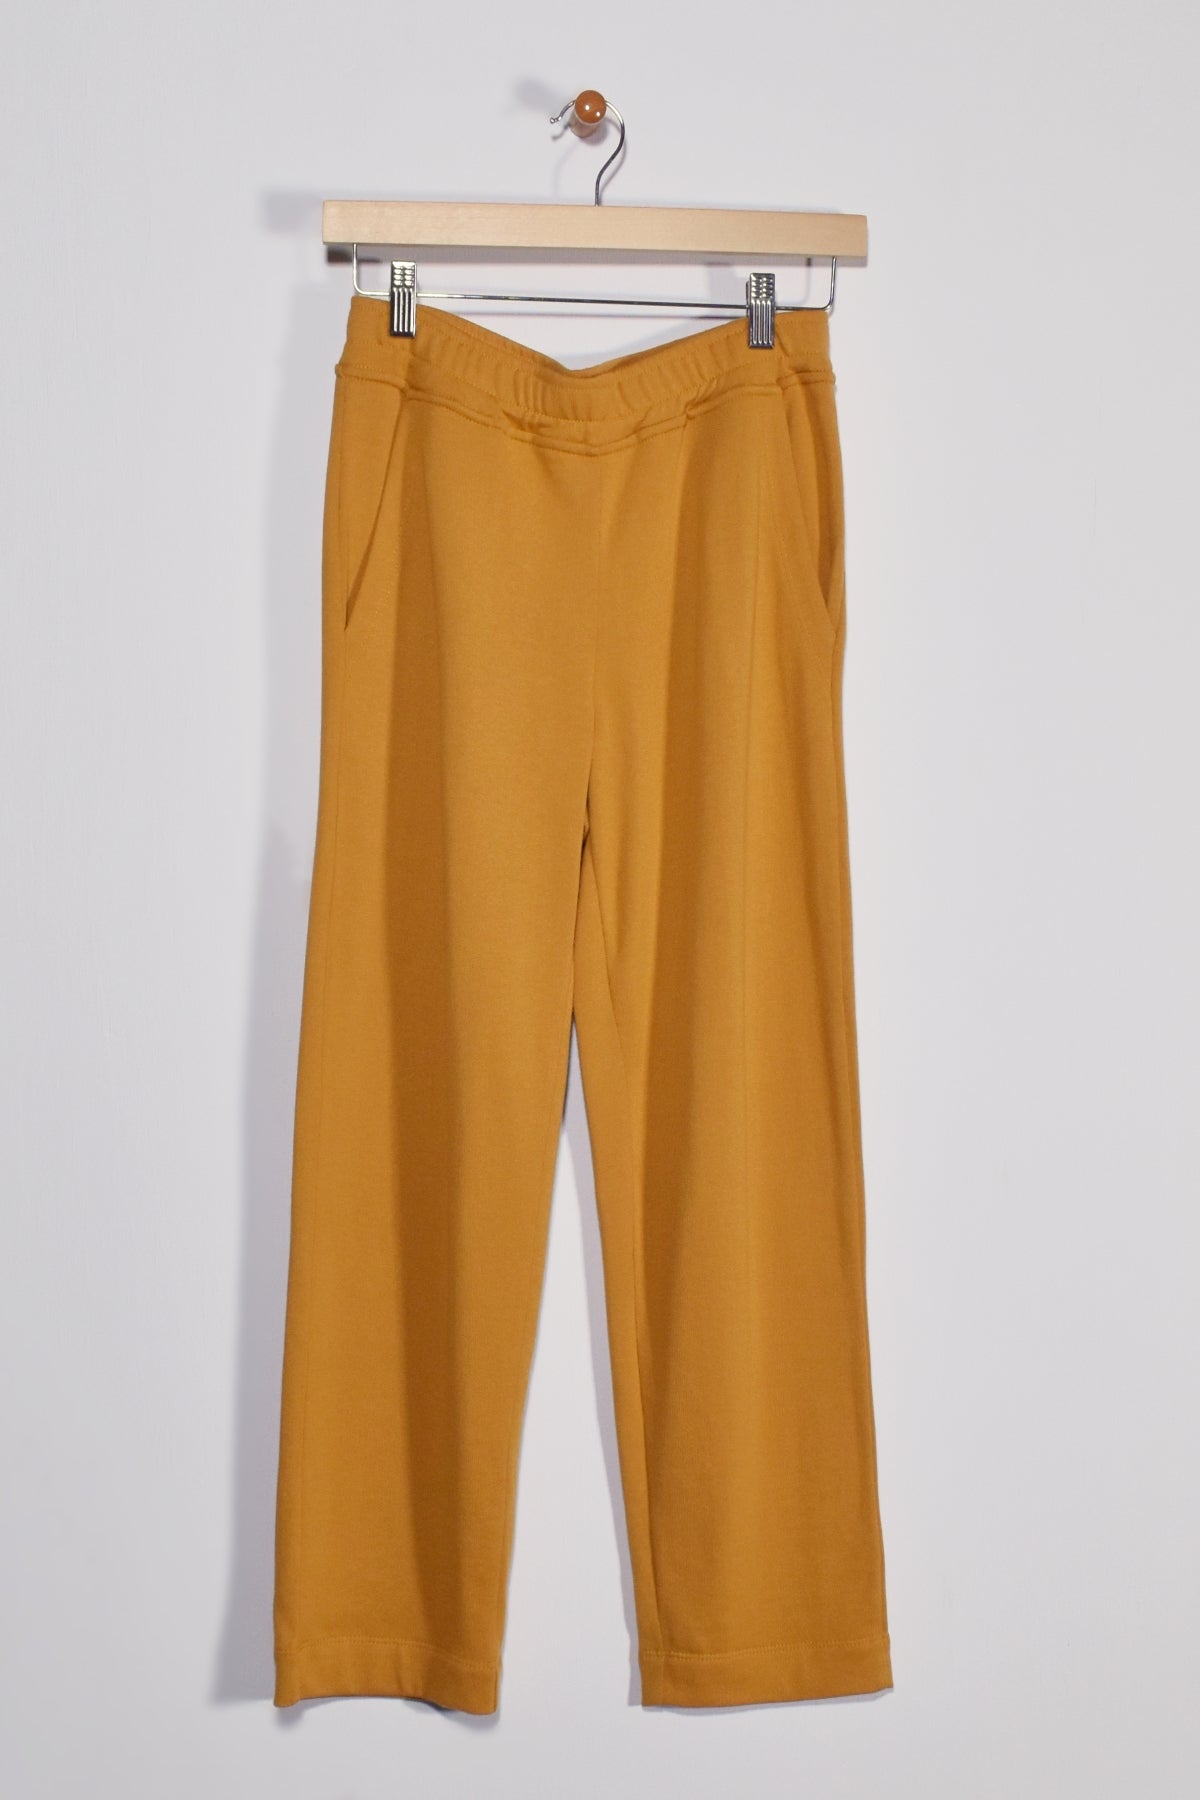 36" Crop Pants with Pockets New Orleans Knitwear